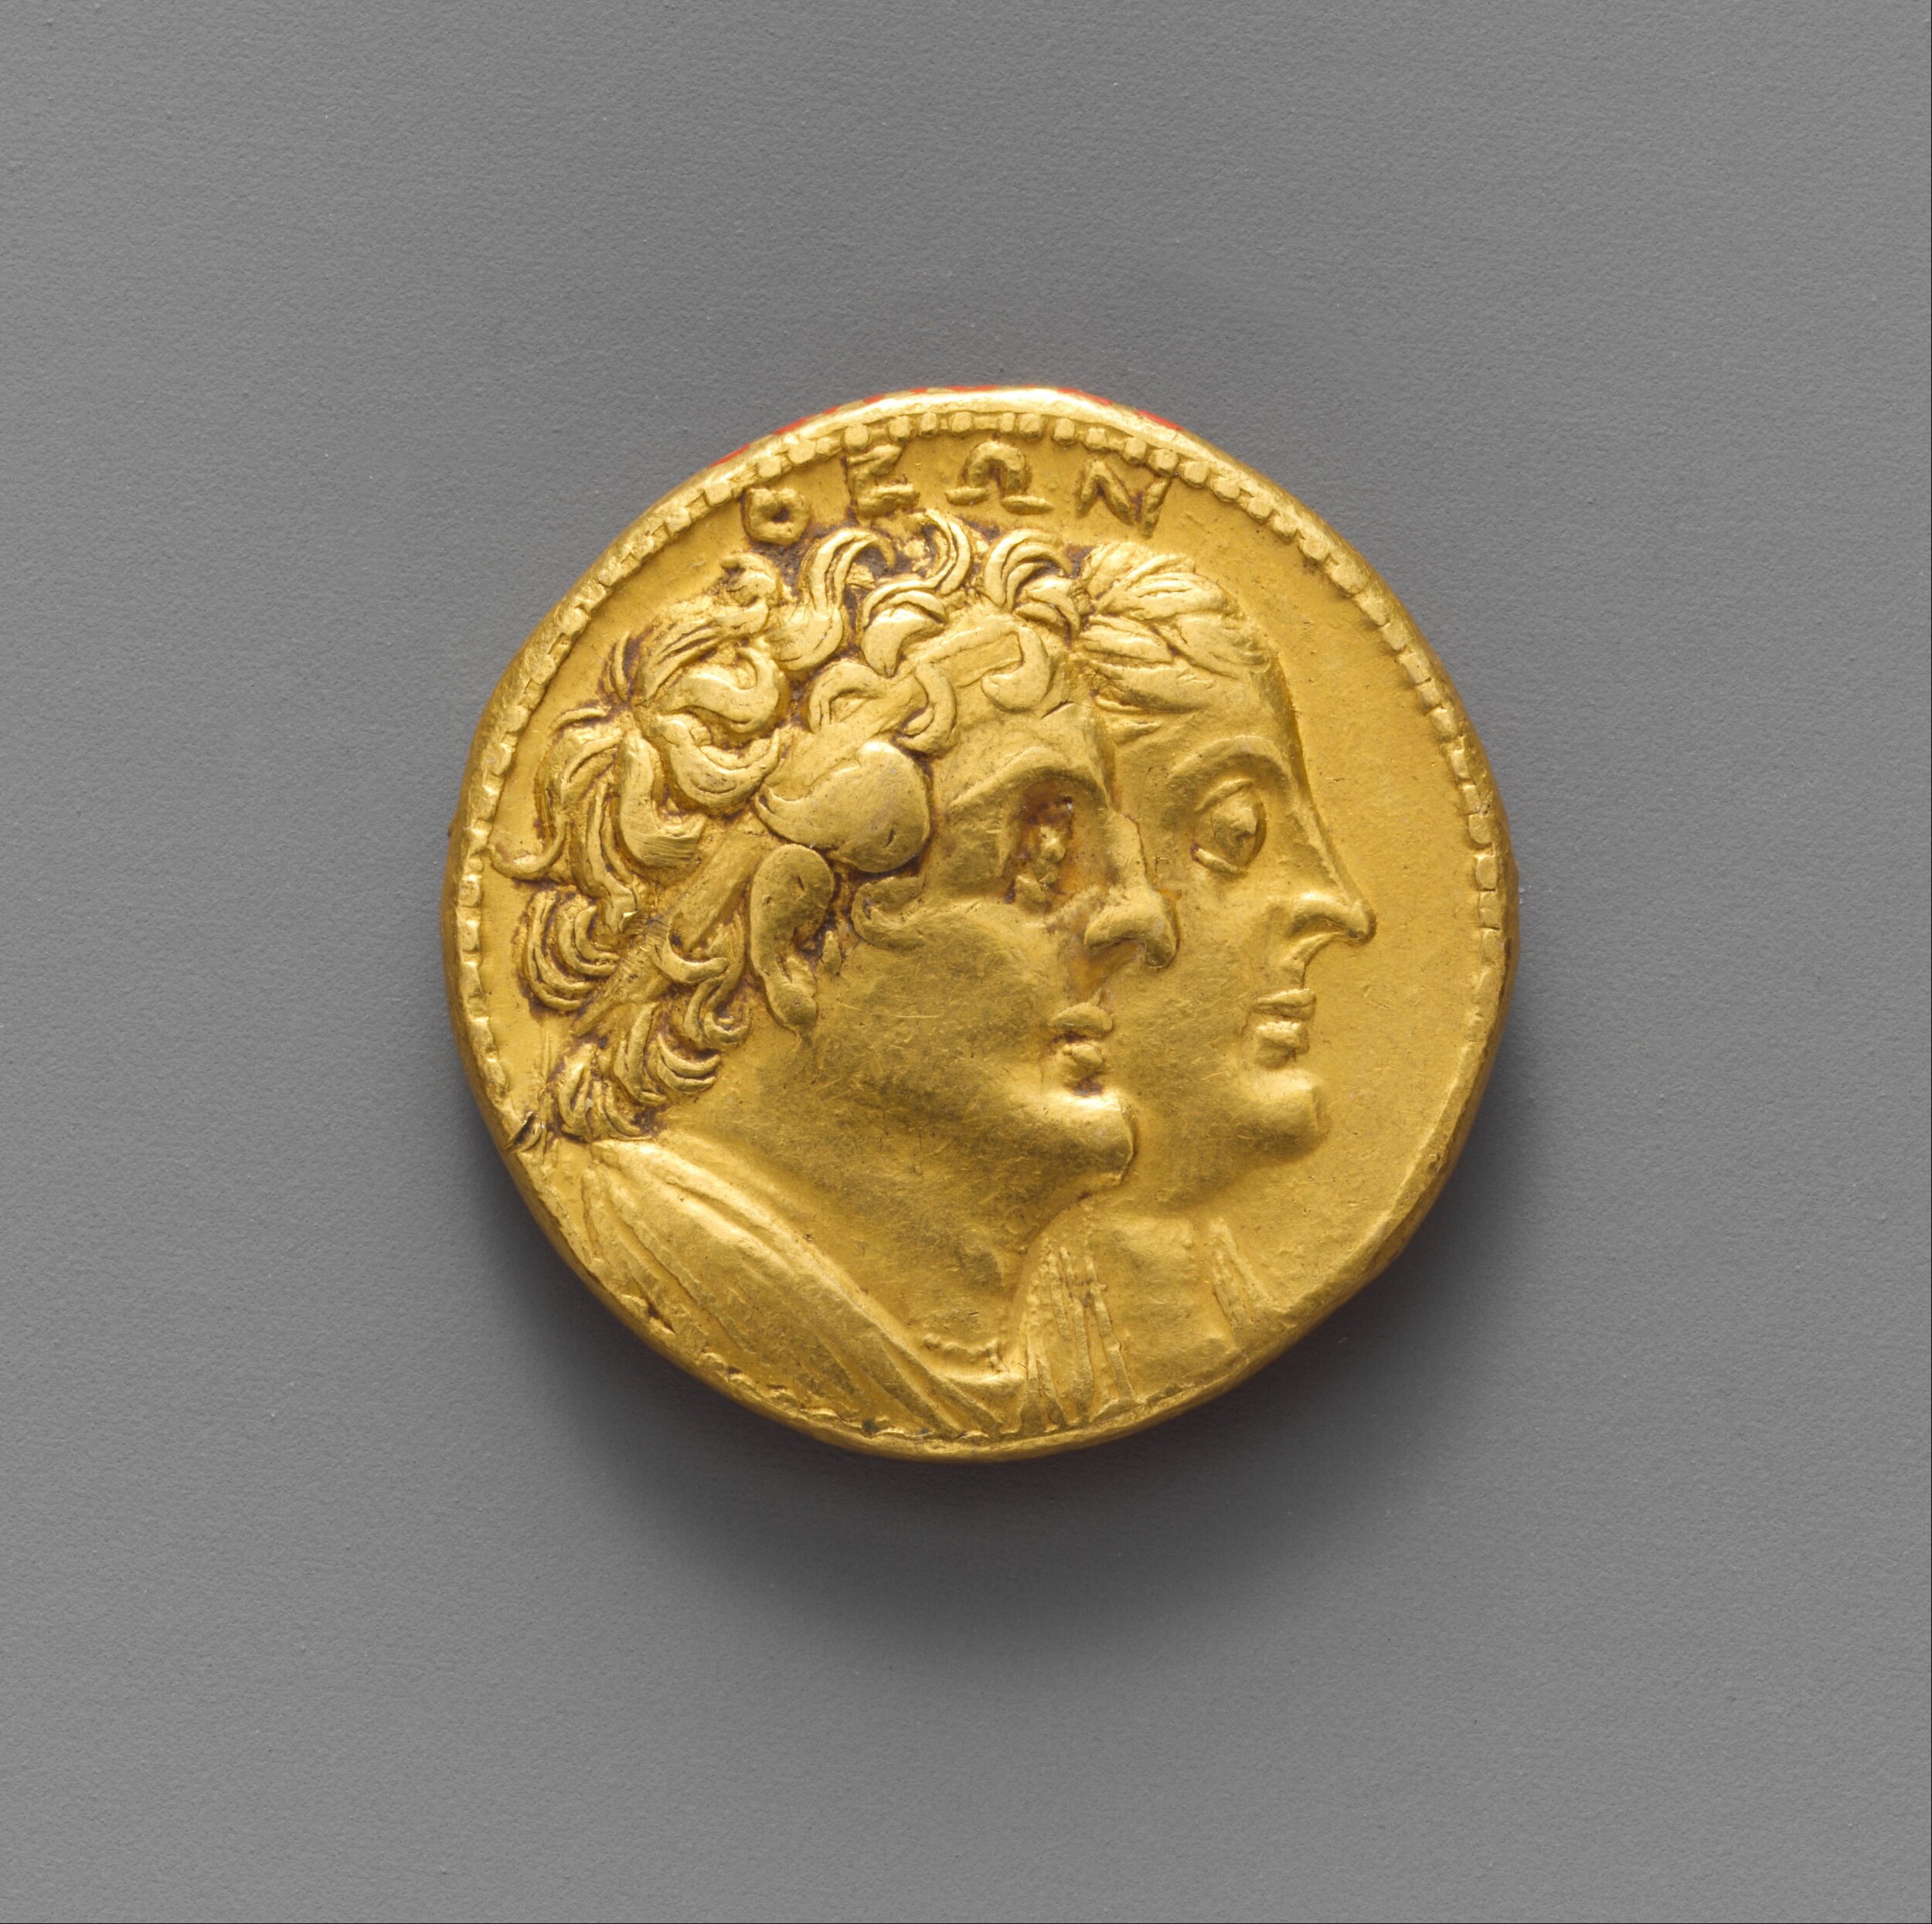 A coin featuring Arsinoe and her brother-husband Ptolemy II.